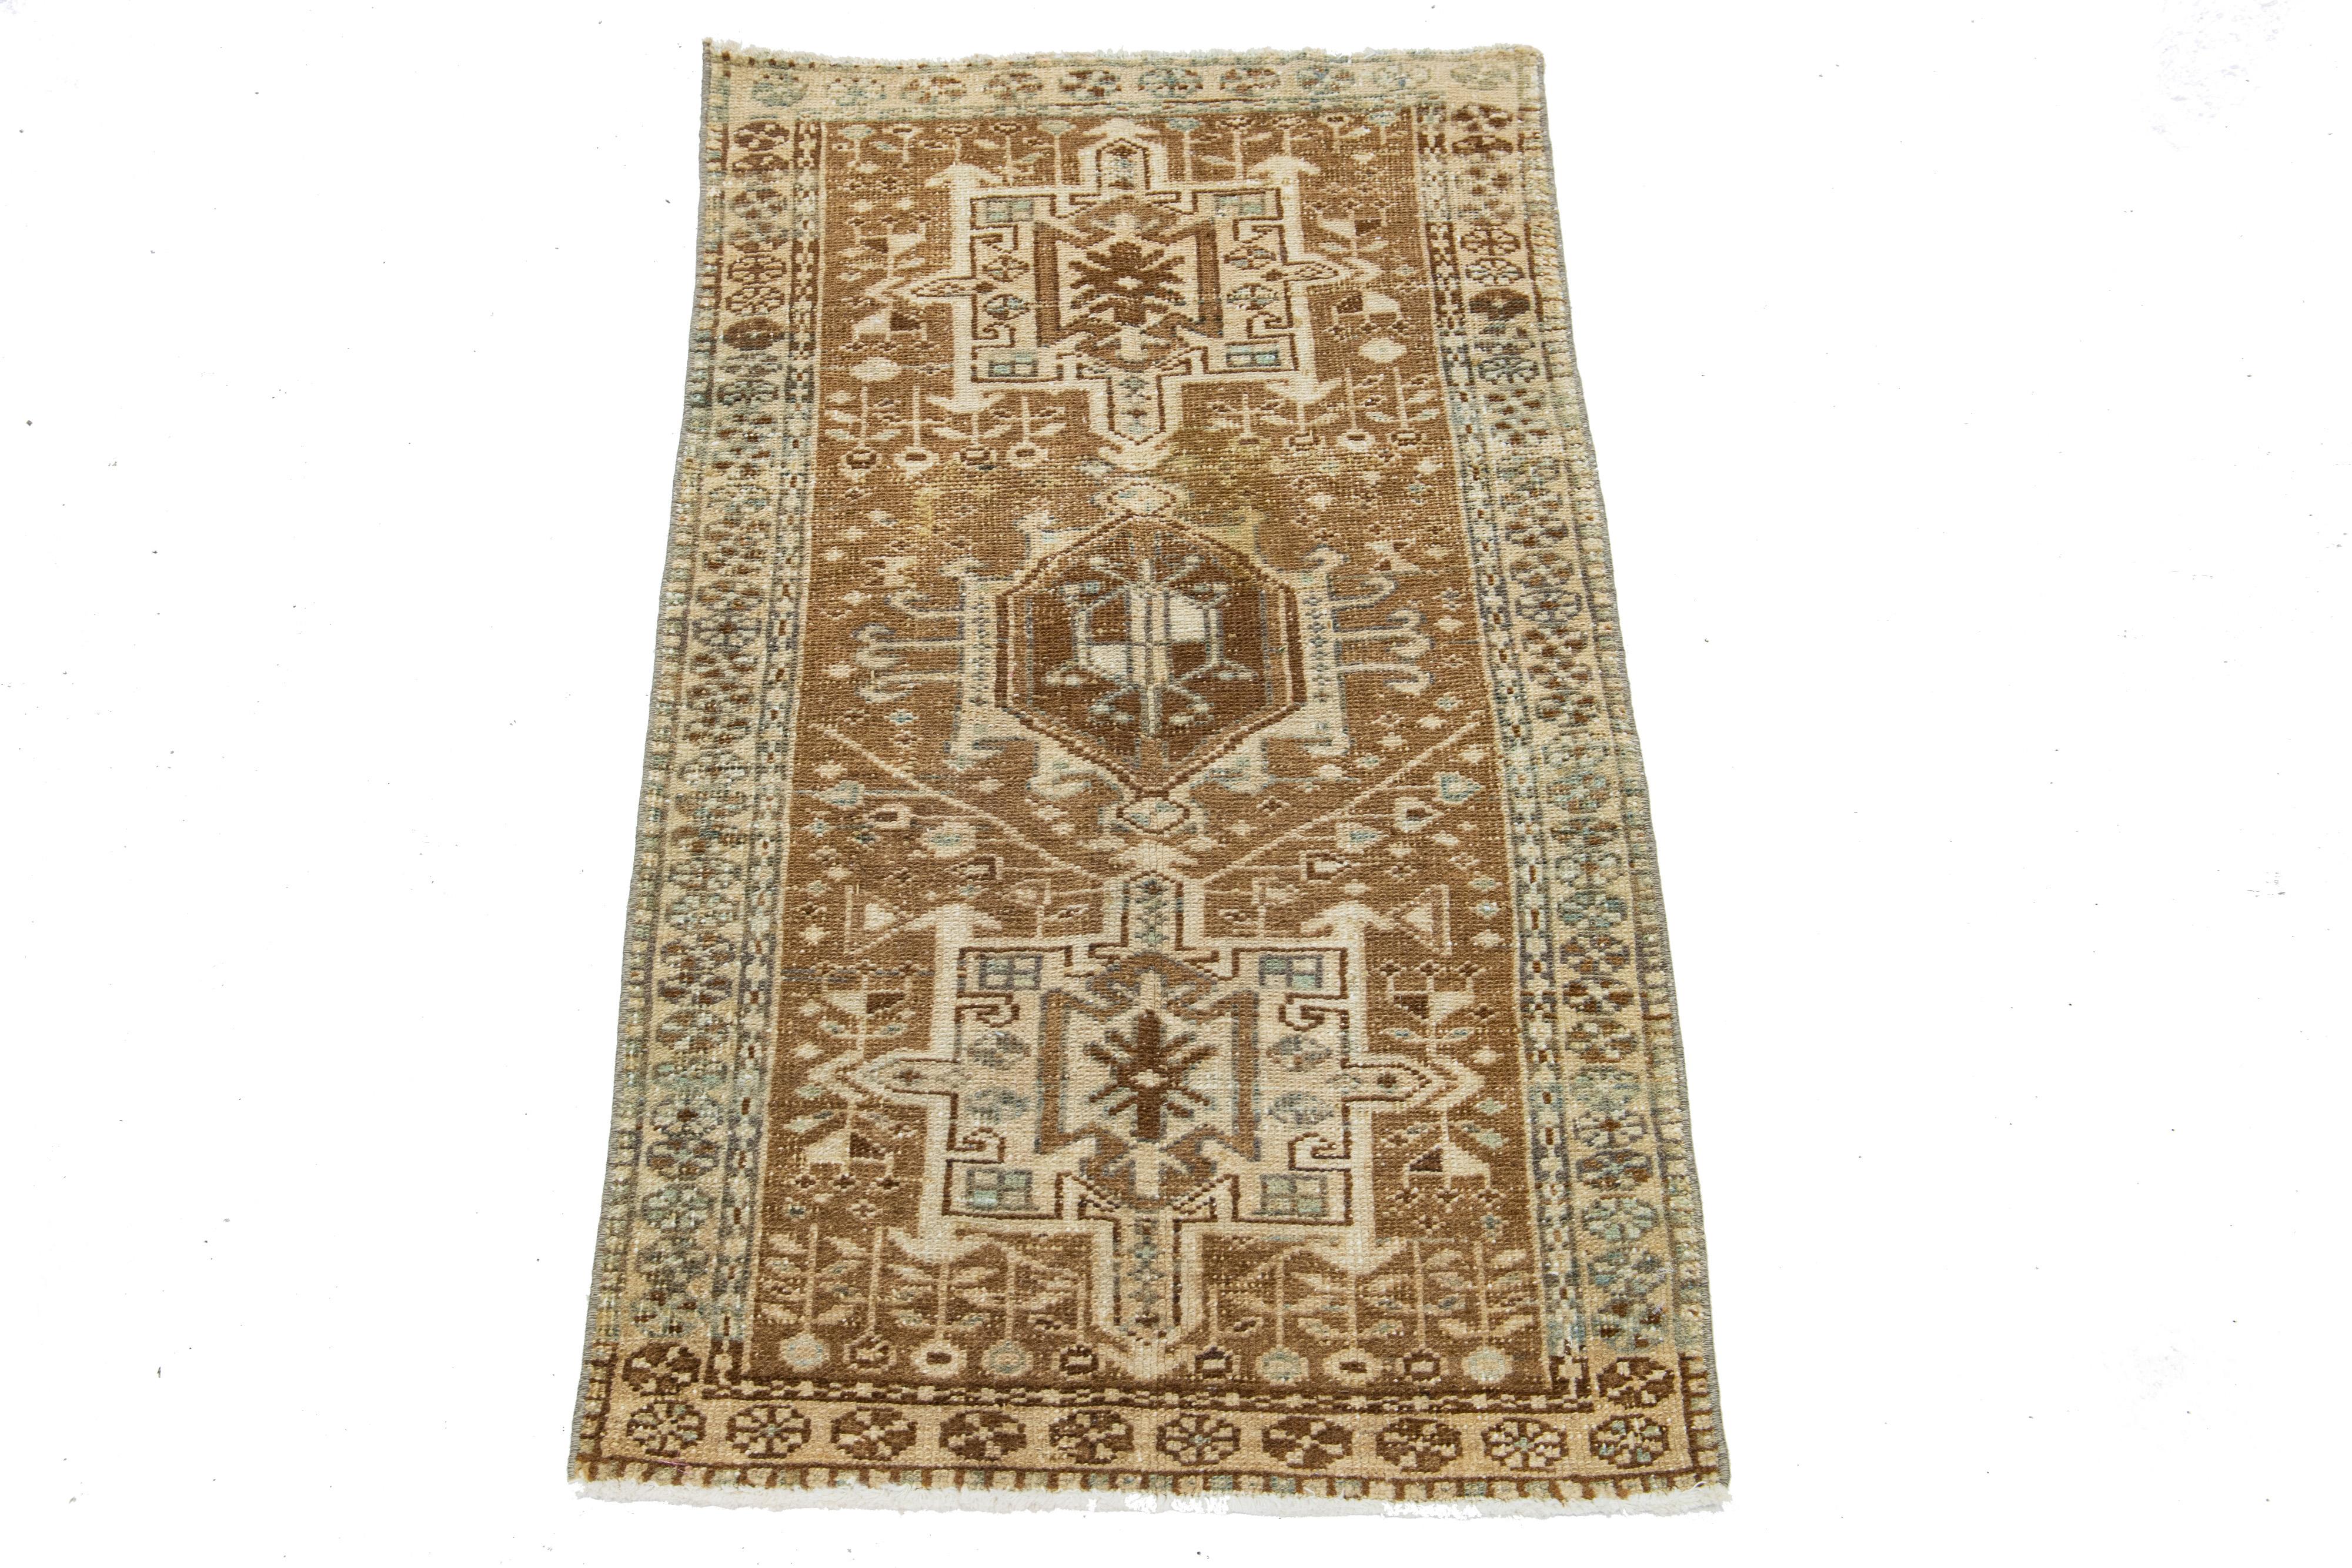 This Persian Heriz wool rug showcases an exquisite traditional floral medallion design with striking beige and blue accents against a brown background. 

This rug measures 2'1